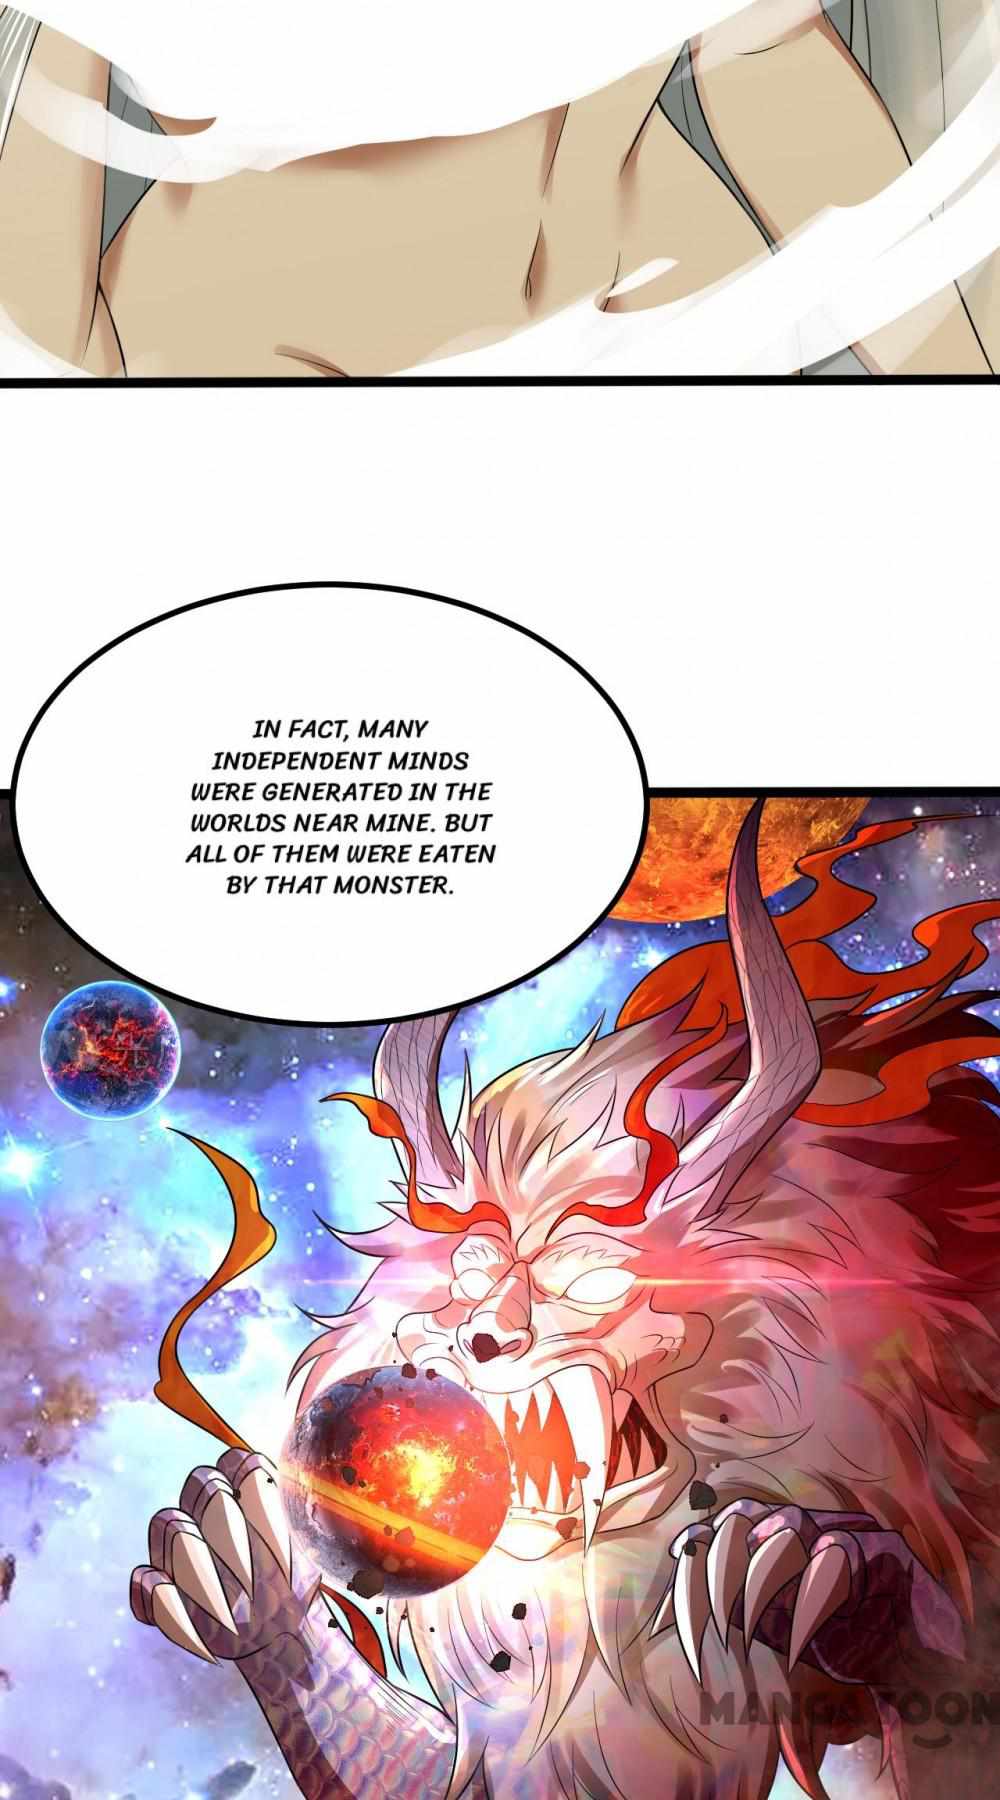 My Three Thousand Years To The Sky Chapter 347-eng-li - Page 15